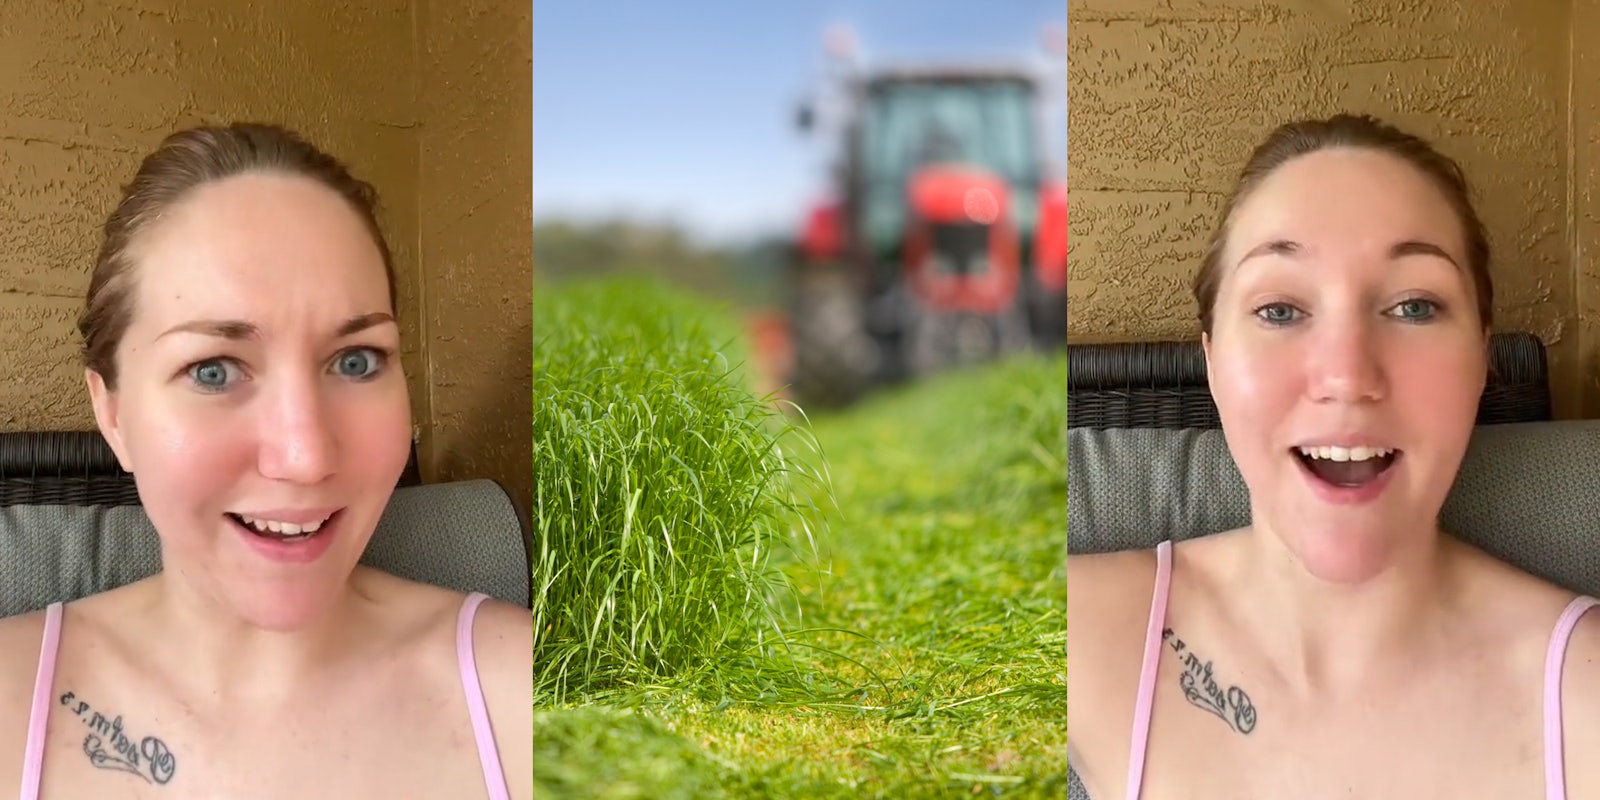 topless maid speaking in front of tan wall (l) mowed grass with blurry tractor background (c) topless maid speaking in front of tan background (r)